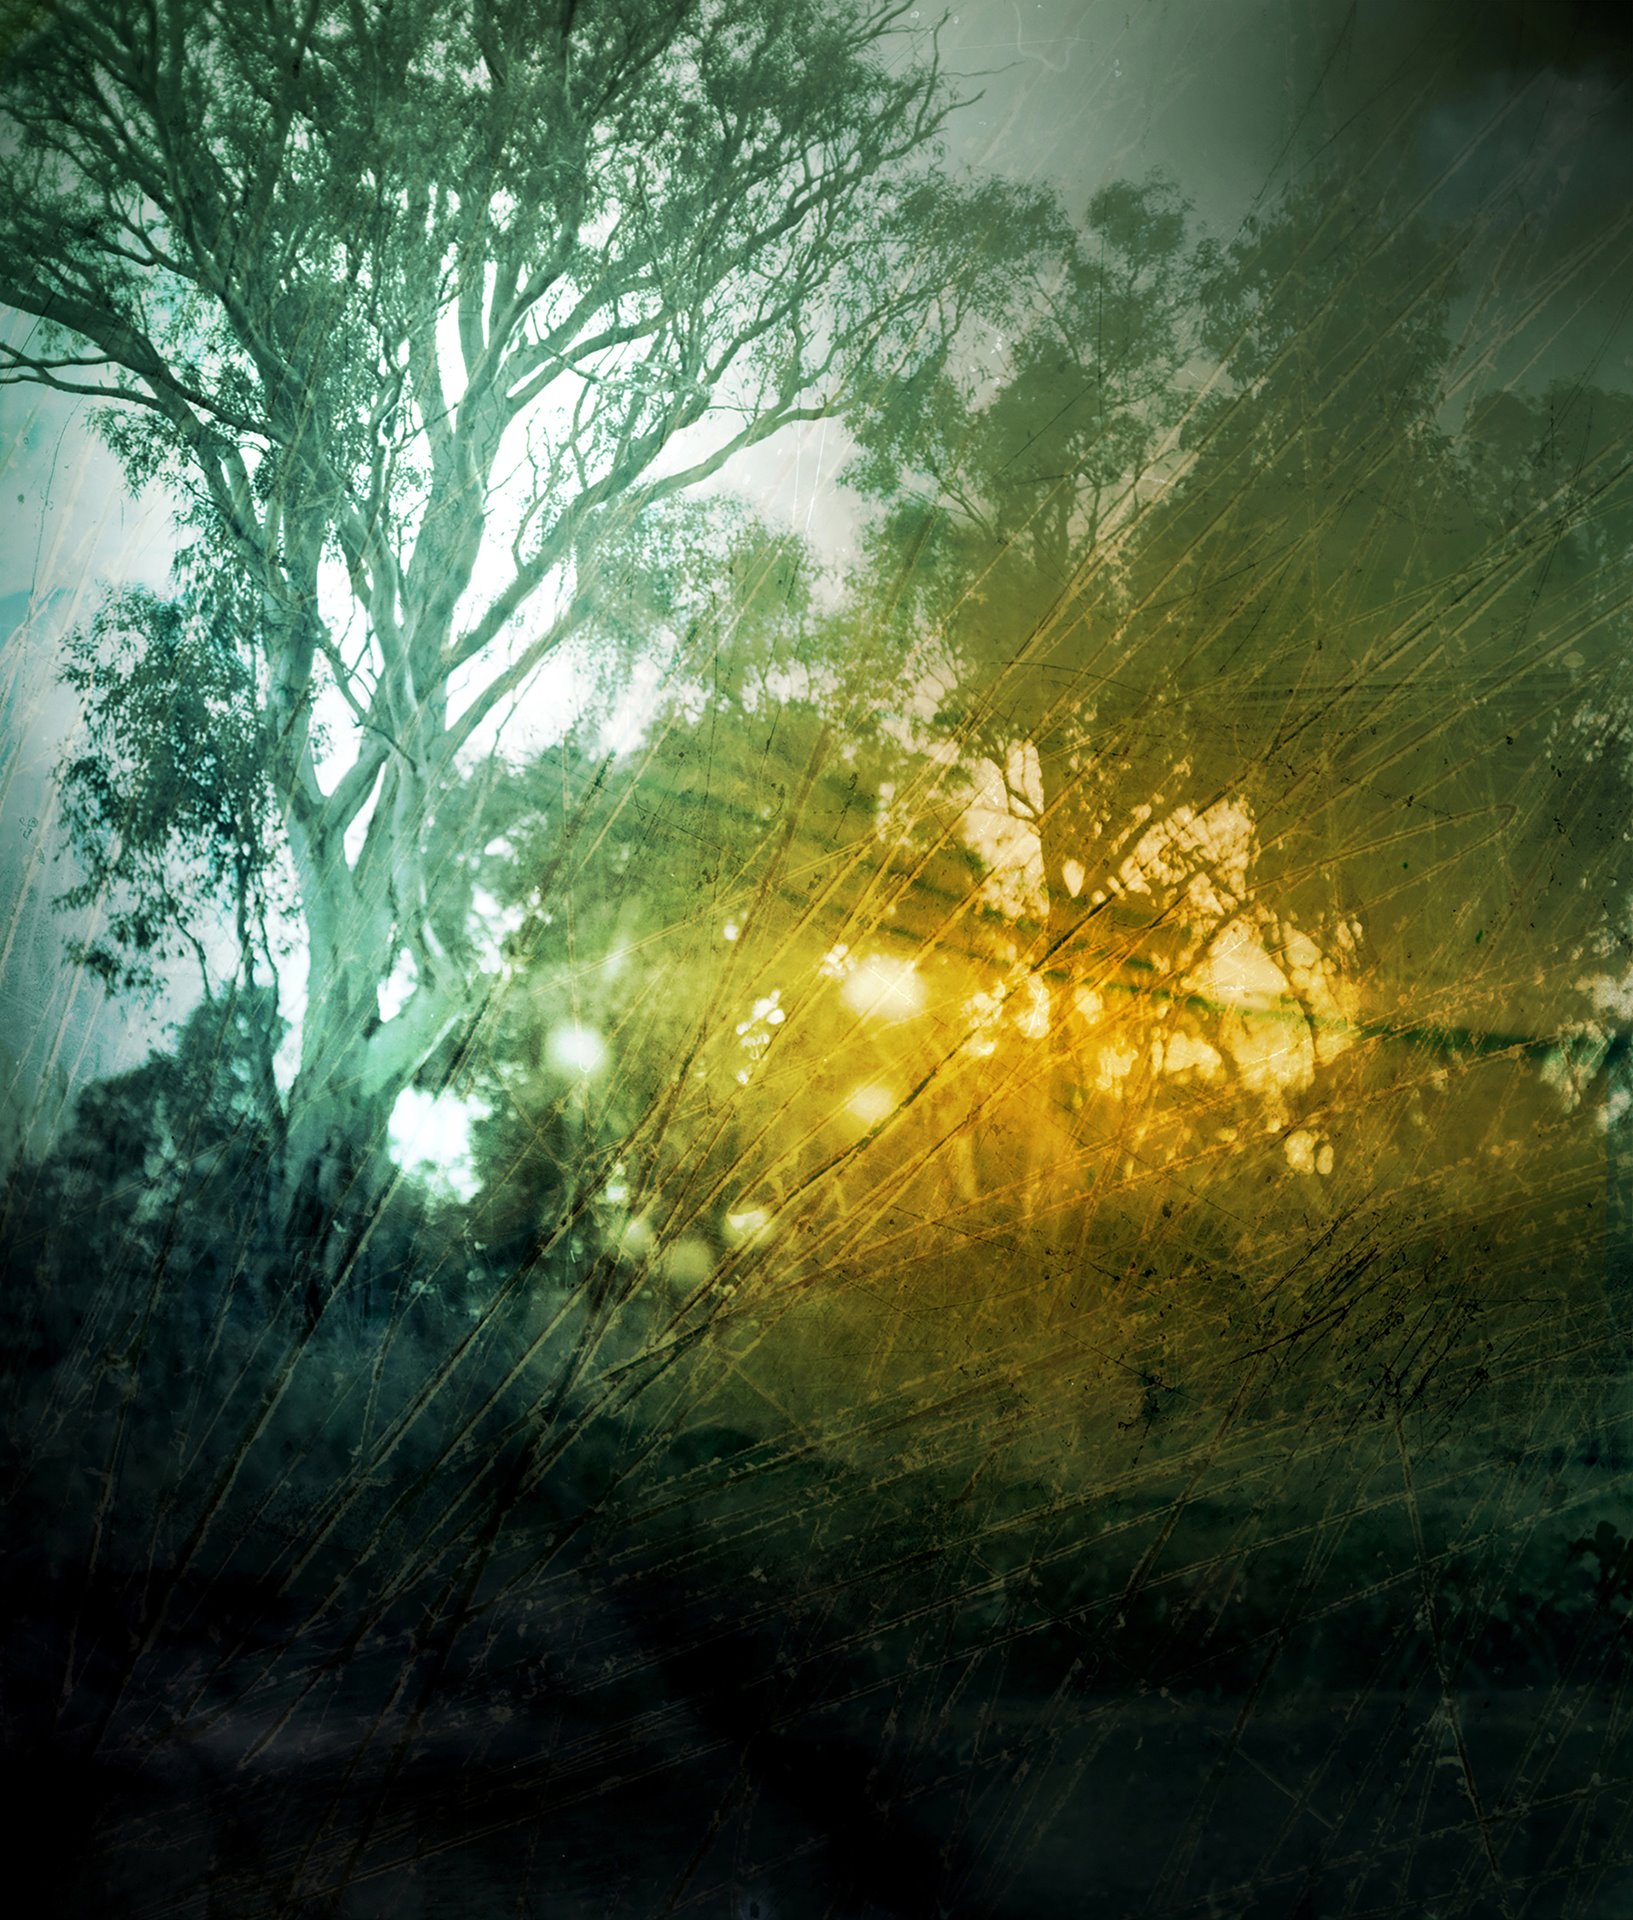 A reimagined landscape of Wagga Wagga (Wiradjuri Land). The photographer painted the photograph with inks, then scratched and reworked the image.